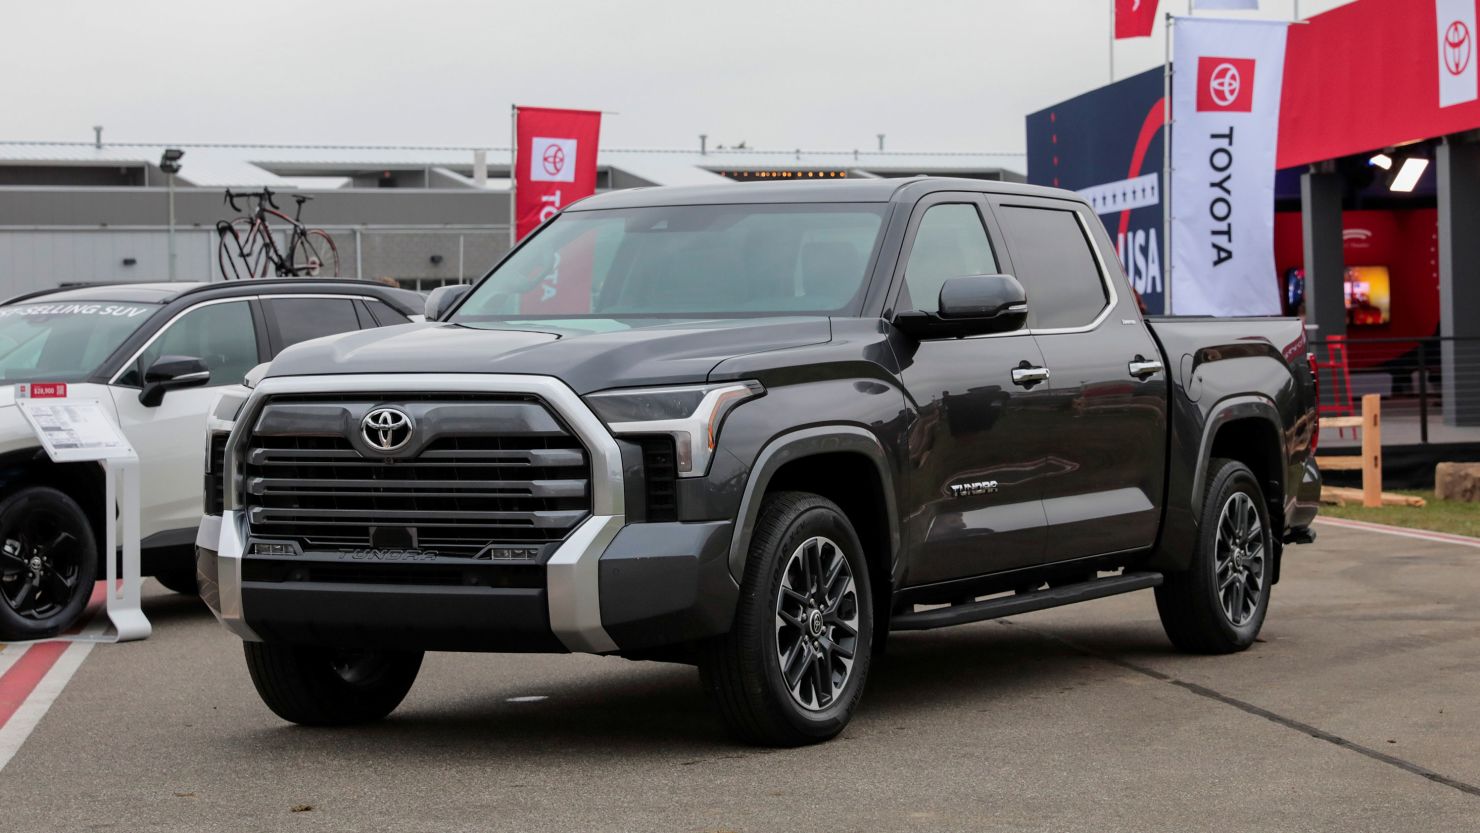 Toyota recalls Tundra models in largest recall this year CNN Business